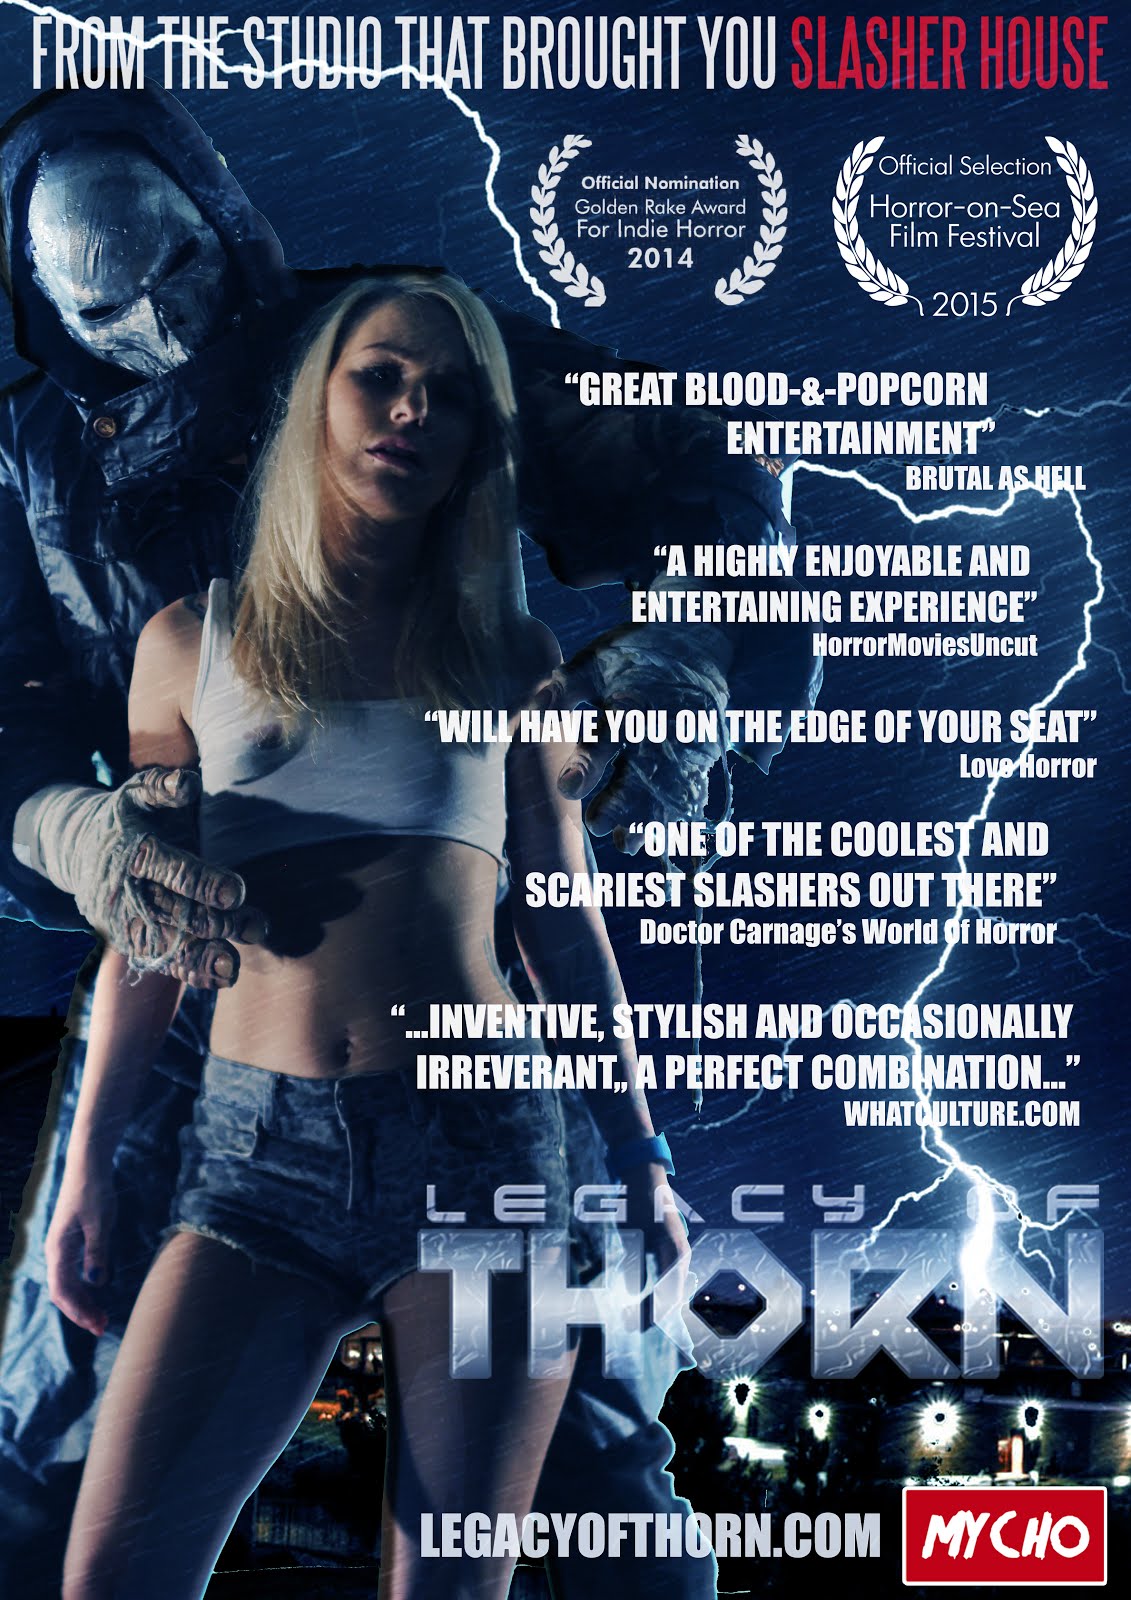 LEGACY OF THORN DVD